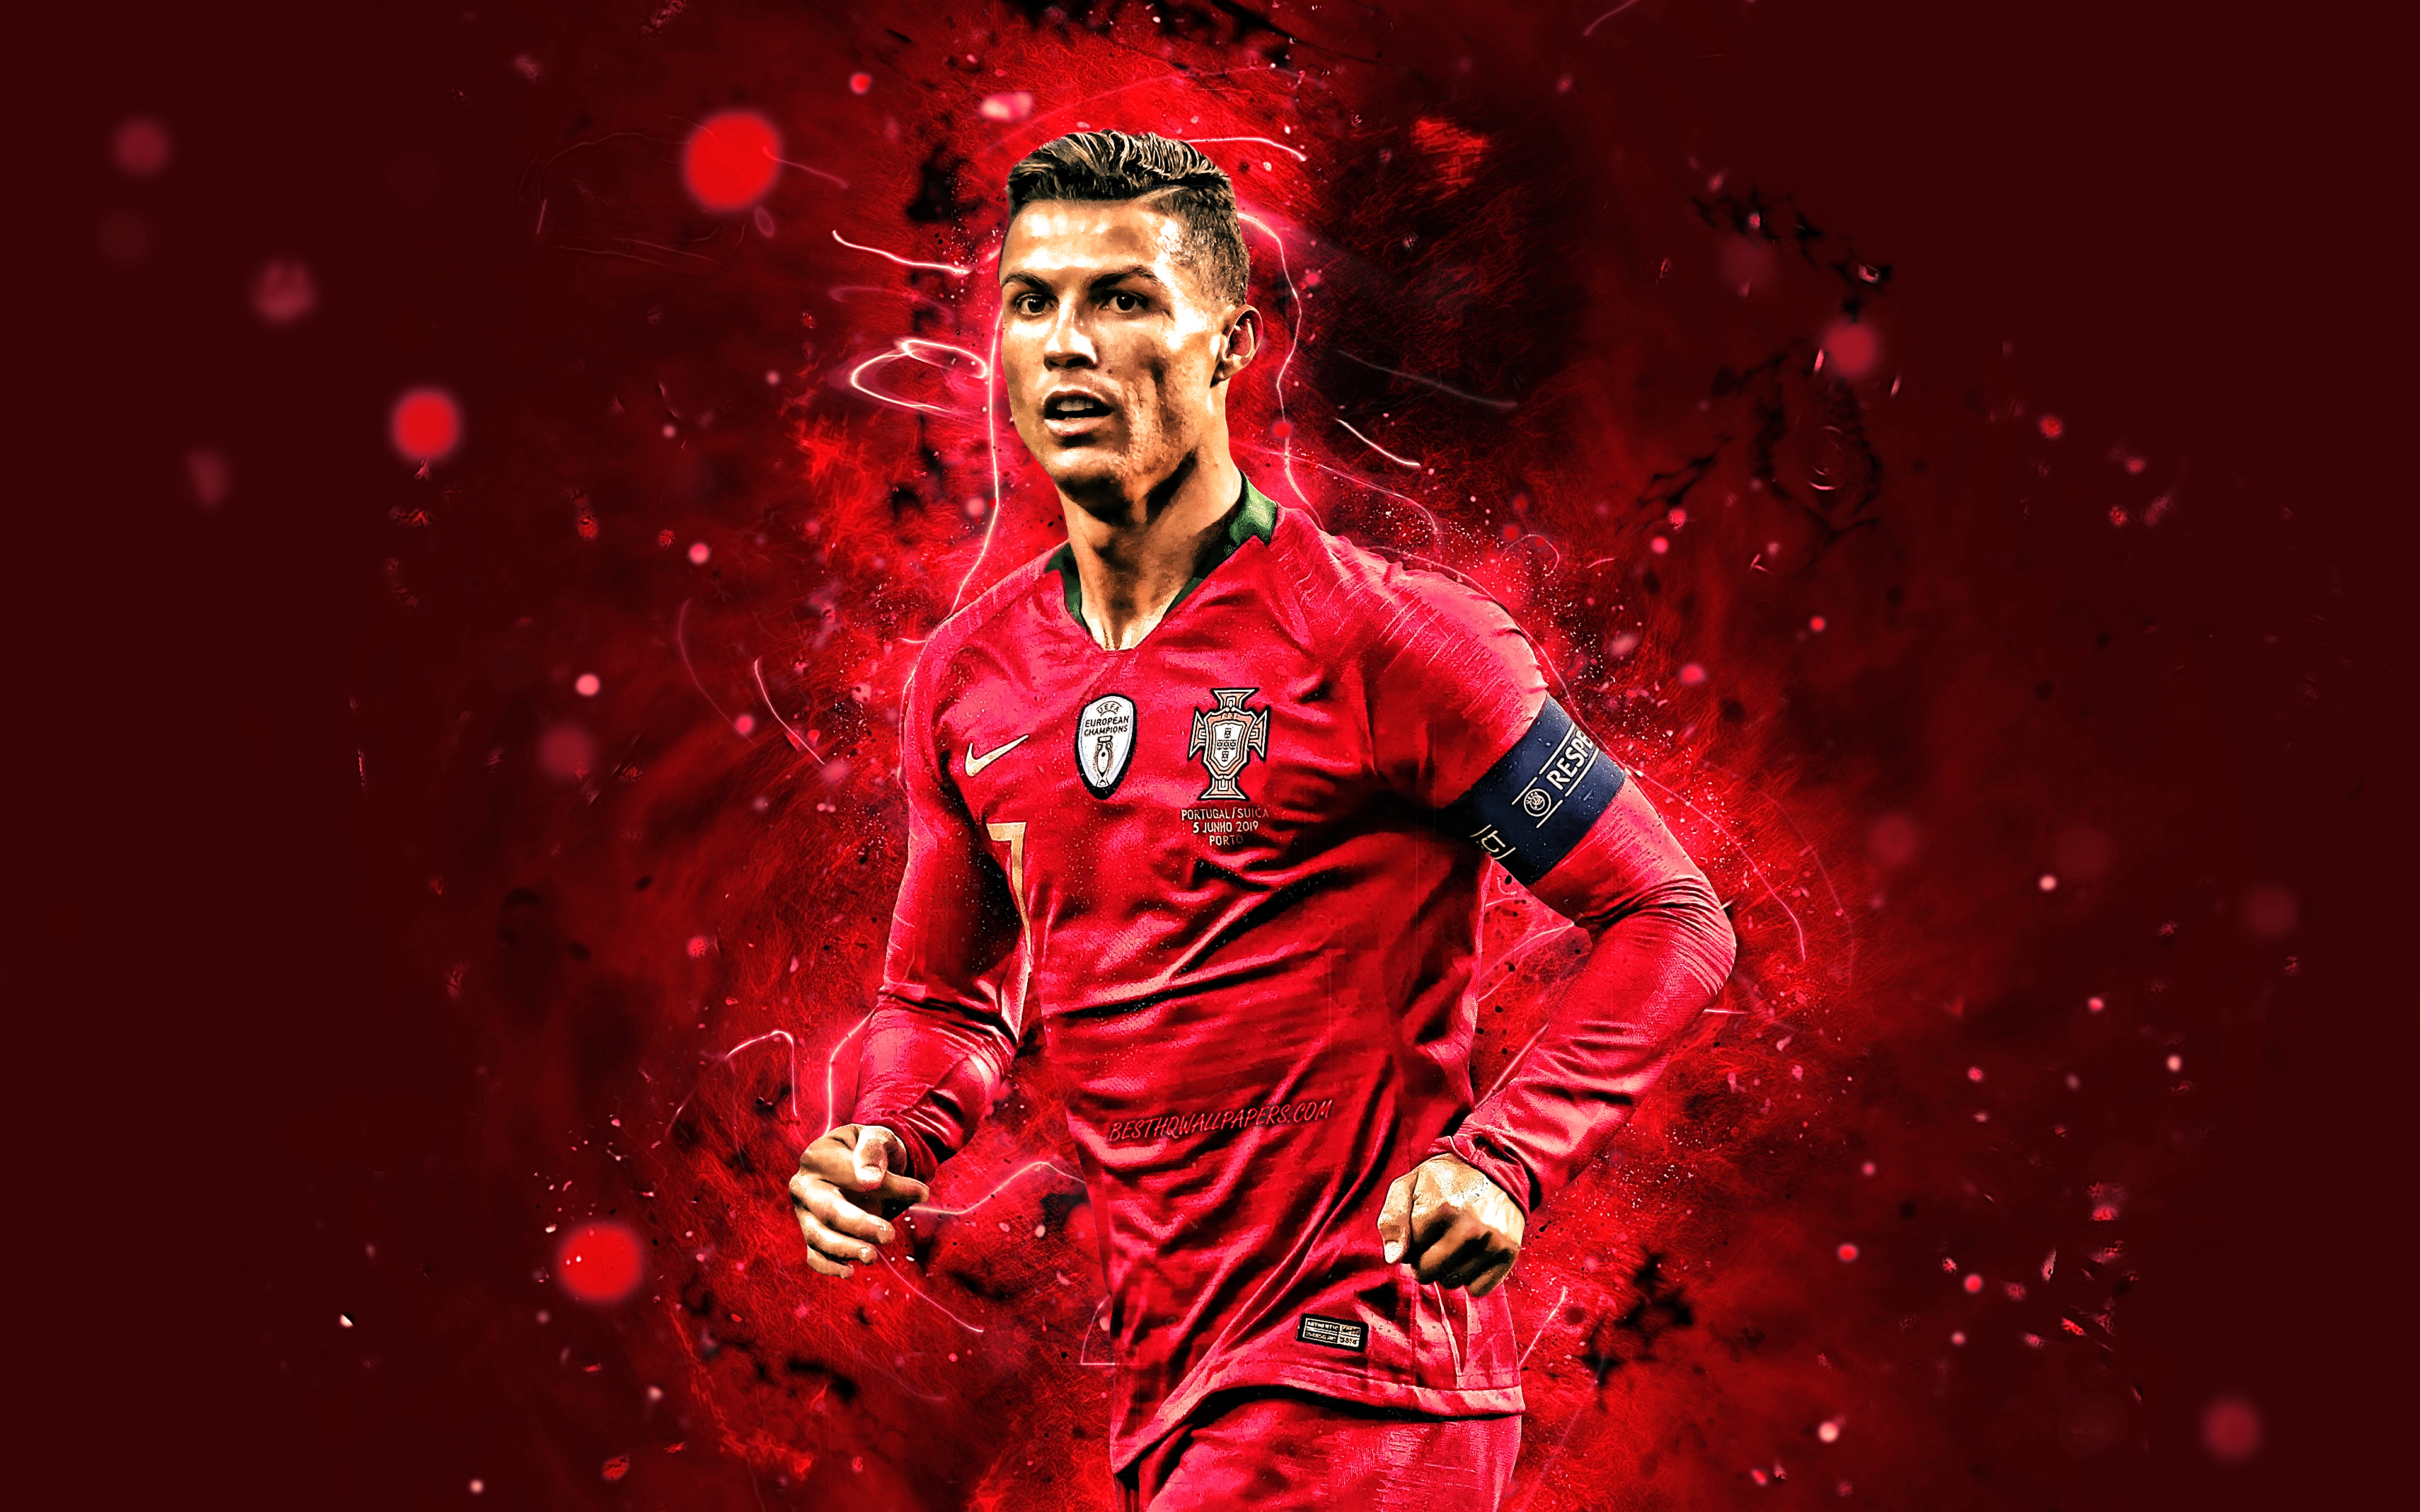 Download Wallpaper 4k, Cristiano Ronaldo, Close Up, Portugal National Team, Soccer, CR Portuguese Football Team, Ronaldo, Cristiano Ronaldo Dos Santos Aveiro, Neon Lights For Desktop With Resolution 3840x2400. High Quality HD Picture